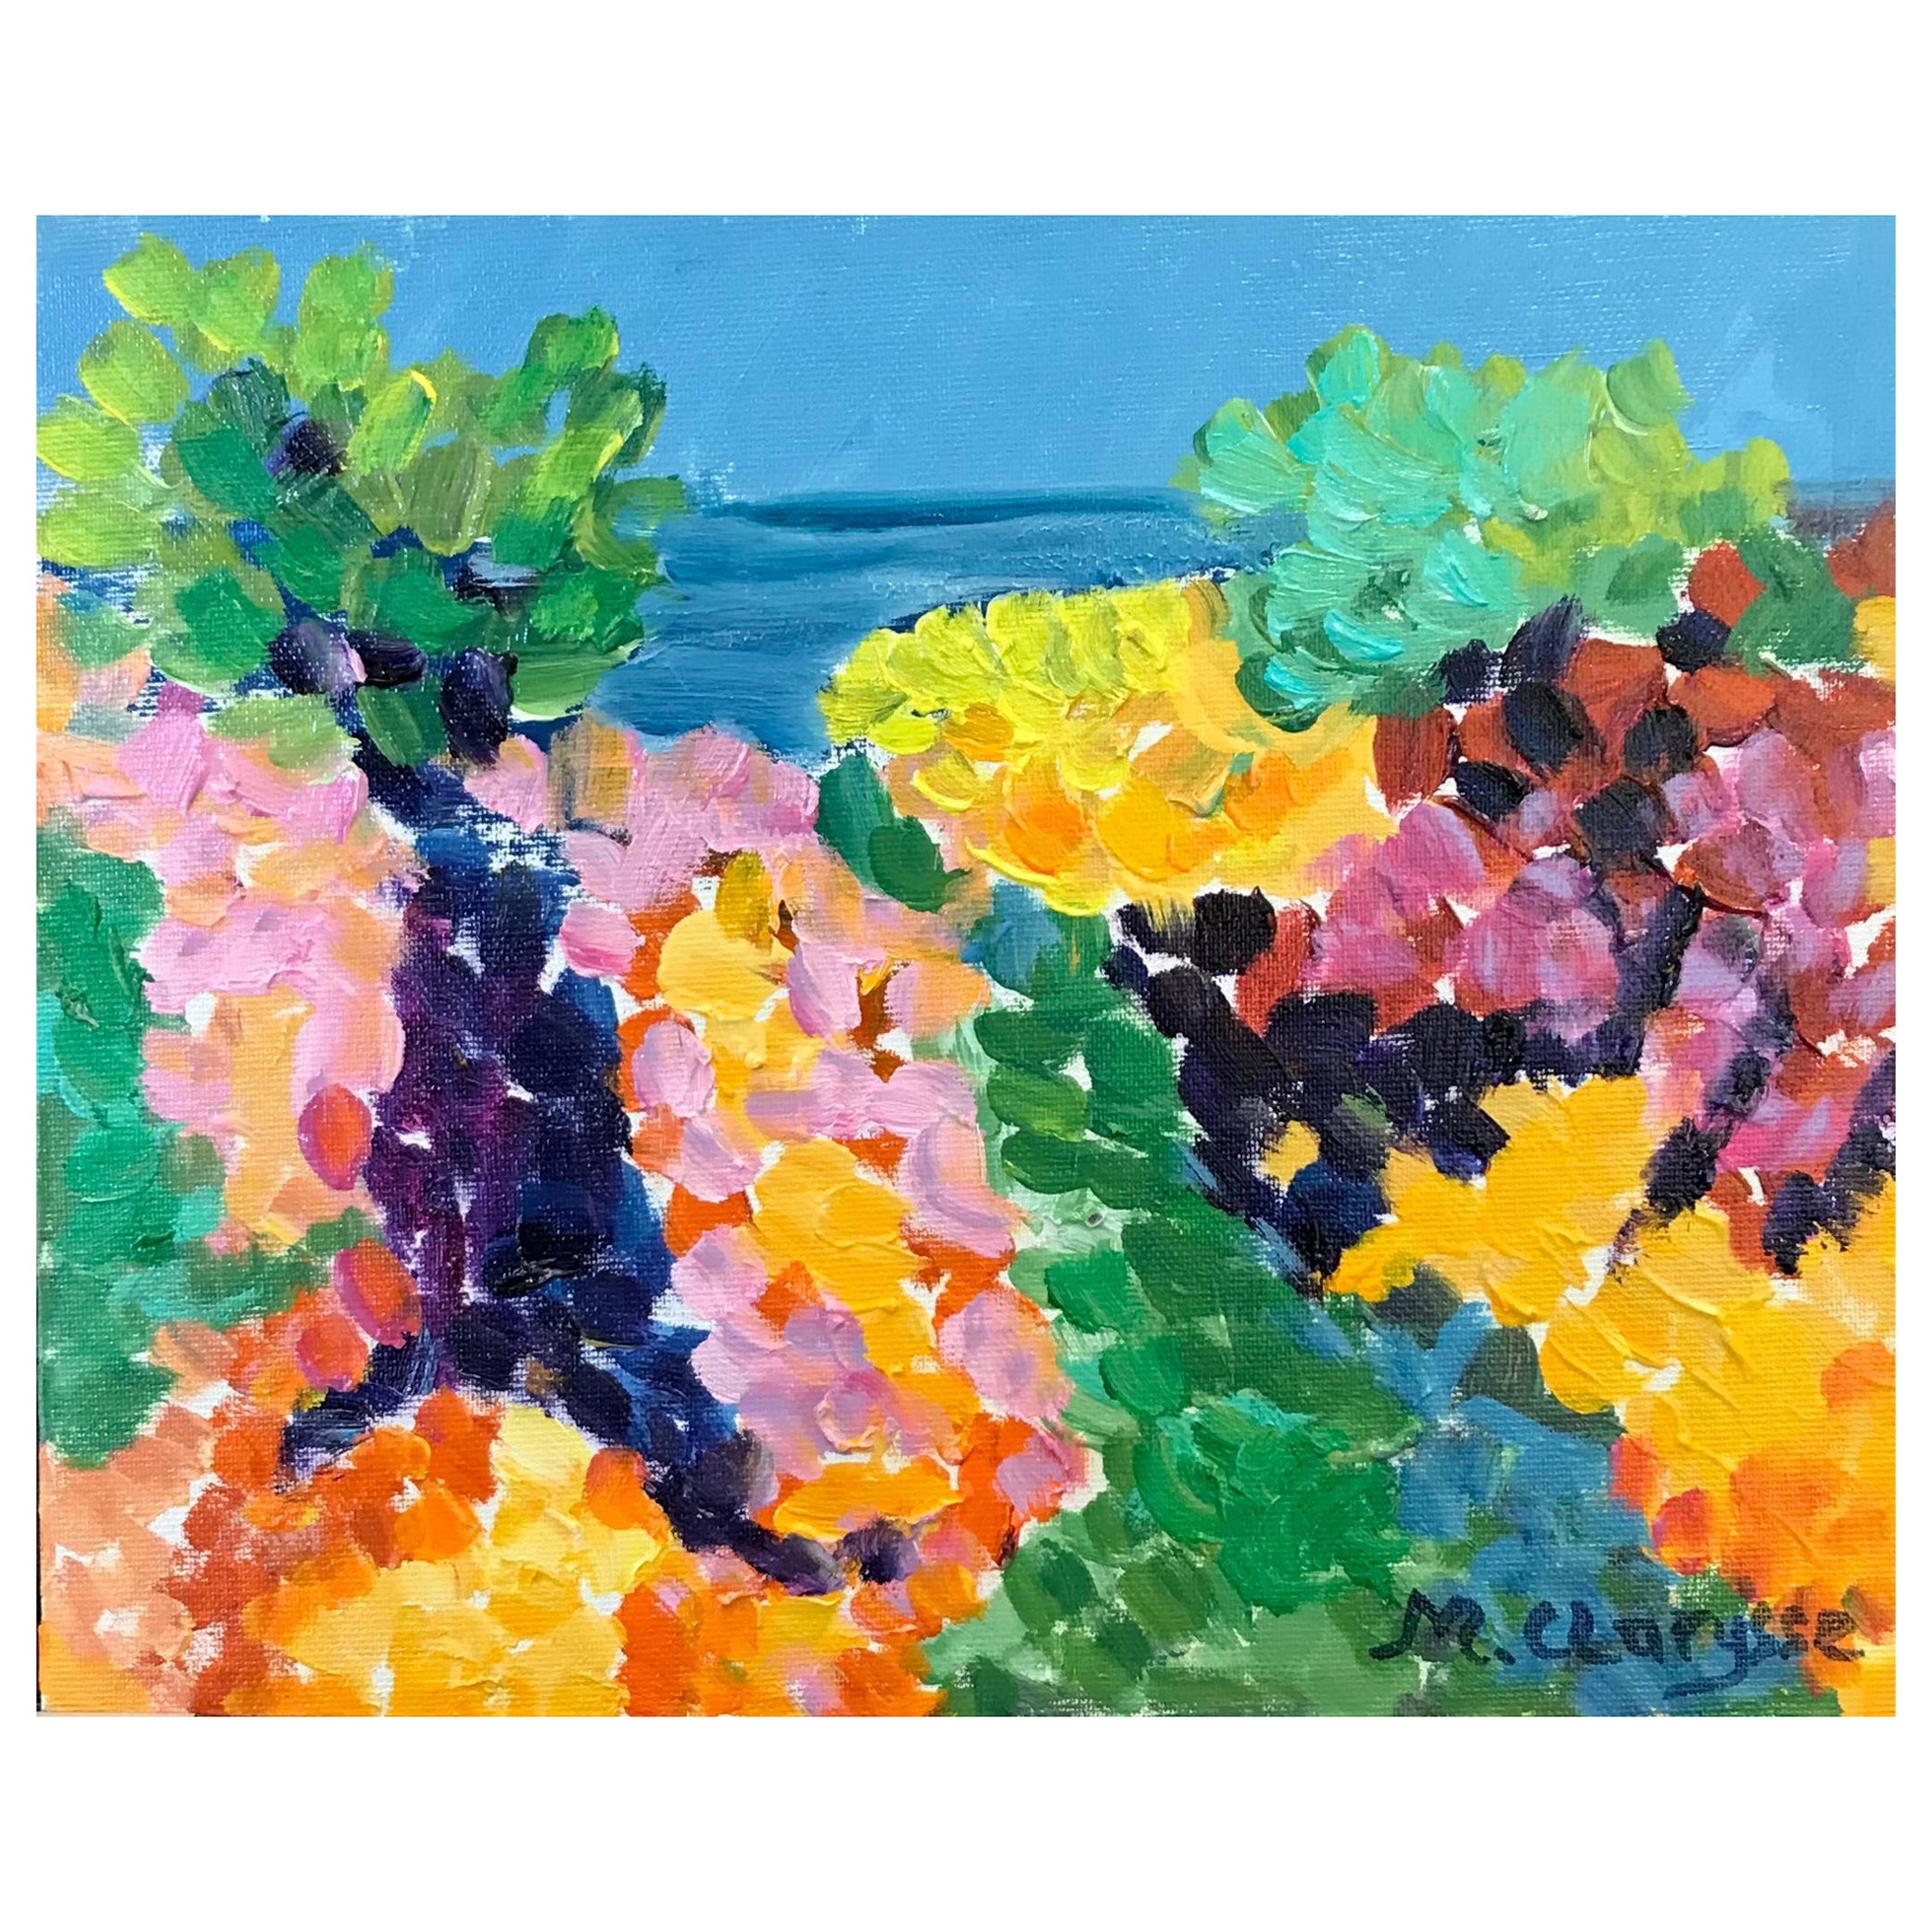 Maggy Clarysse Landscape Painting - Bright & Colorful French Impressionist Oil Painting Abstract Dotty Landscape